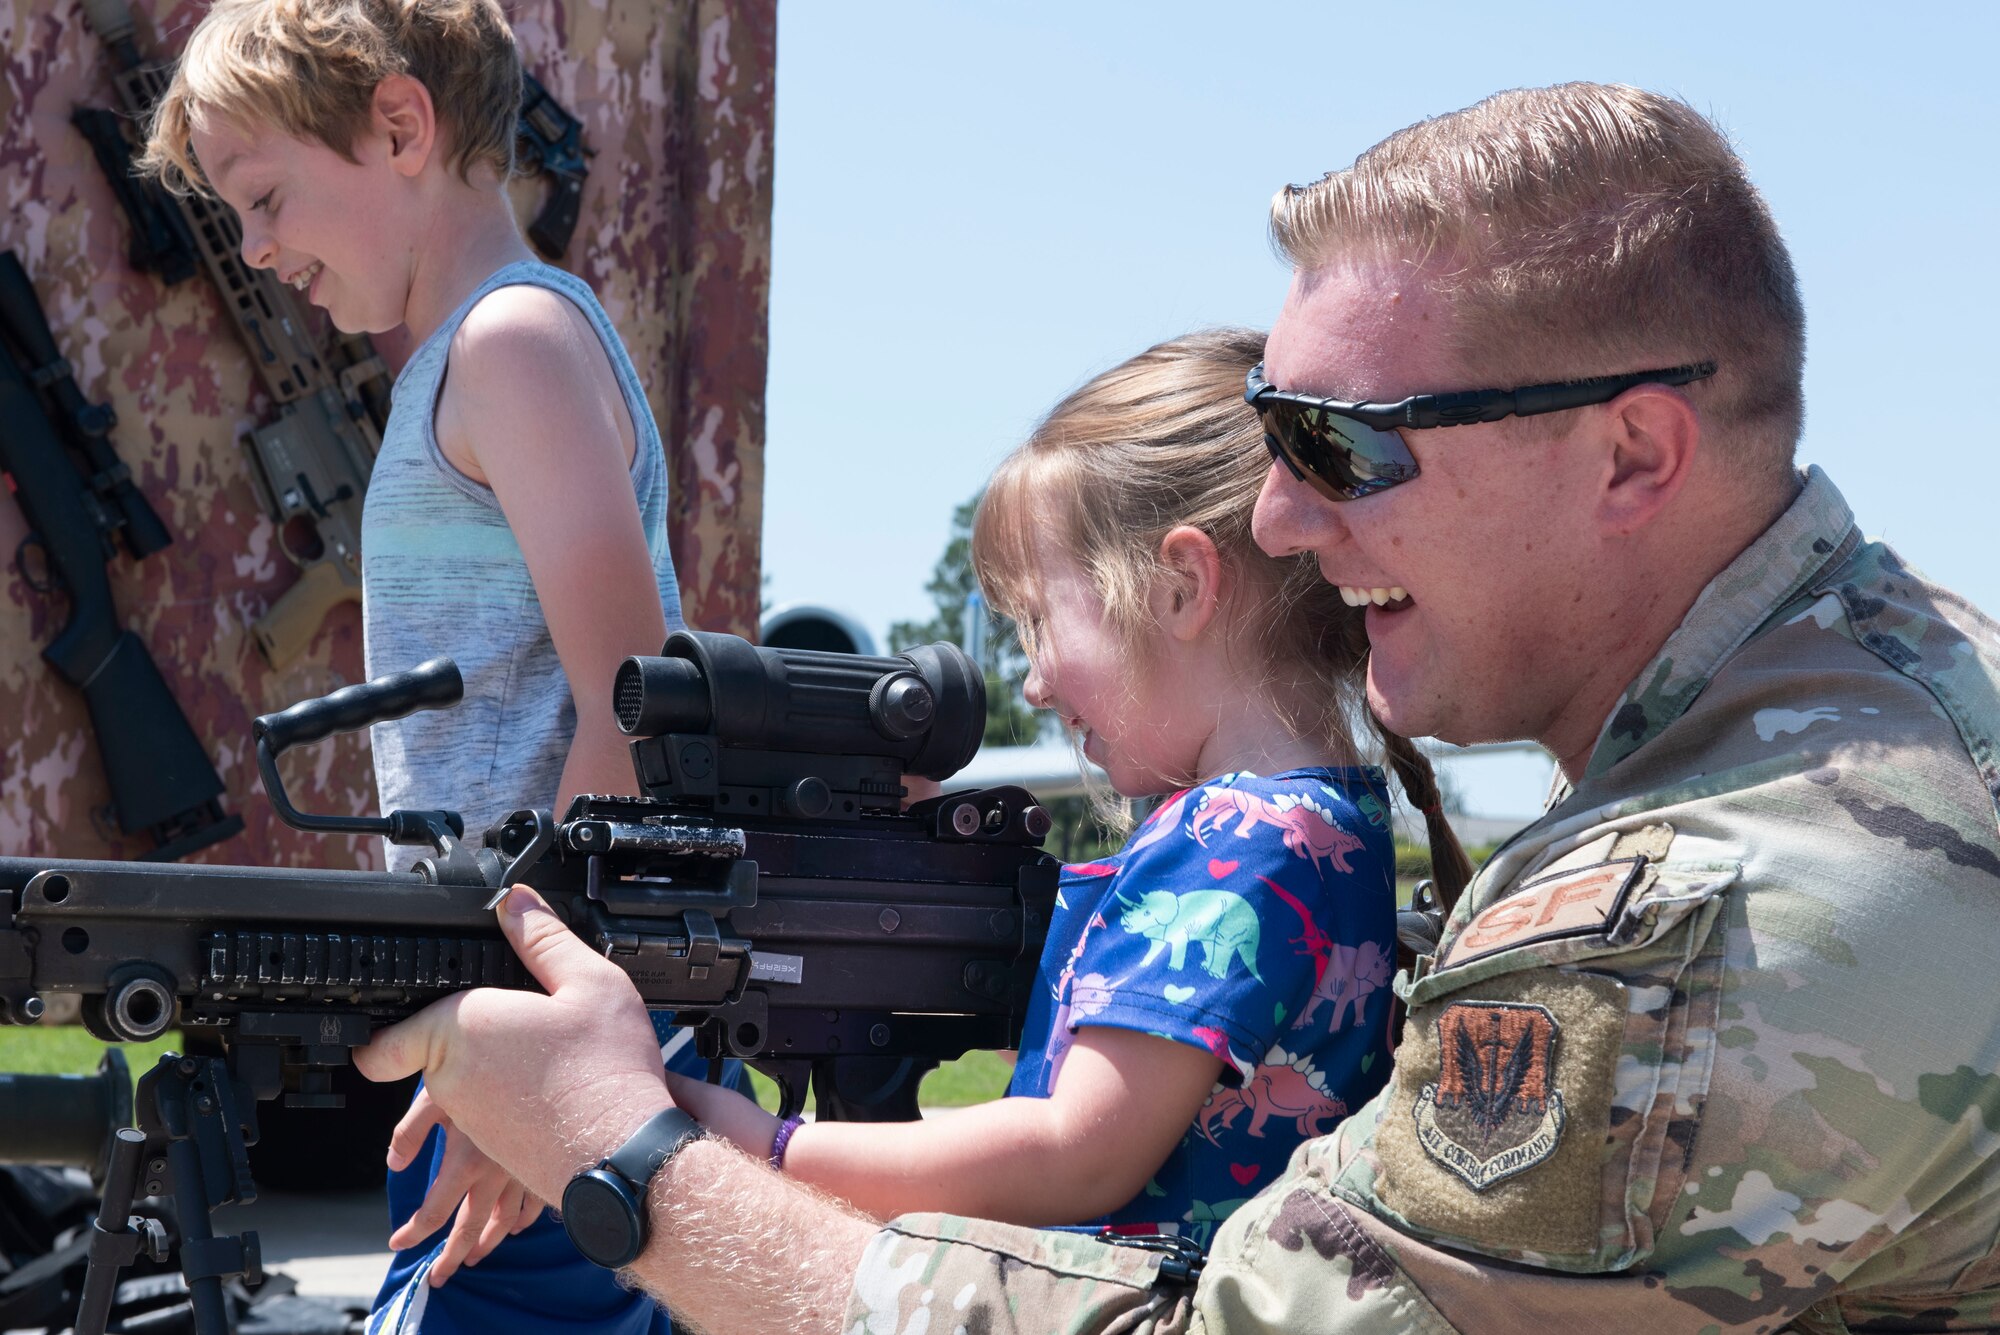 U.S. Air Force Staff Sgt. Kyle Jester, 23rd Security Forces Squadron patrolman, shows his daughter an M60 machine gun during a law enforcement display as part of National Police Week at Moody Air Force Base, Georgia, May 17, 2022. The law enforcement display gave Moody personnel and their families an opportunity to learn more about the tactics and equipment military and local law enforcement agencies employ. (U.S. Air Force photo by Staff Sgt. Thomas Johns)